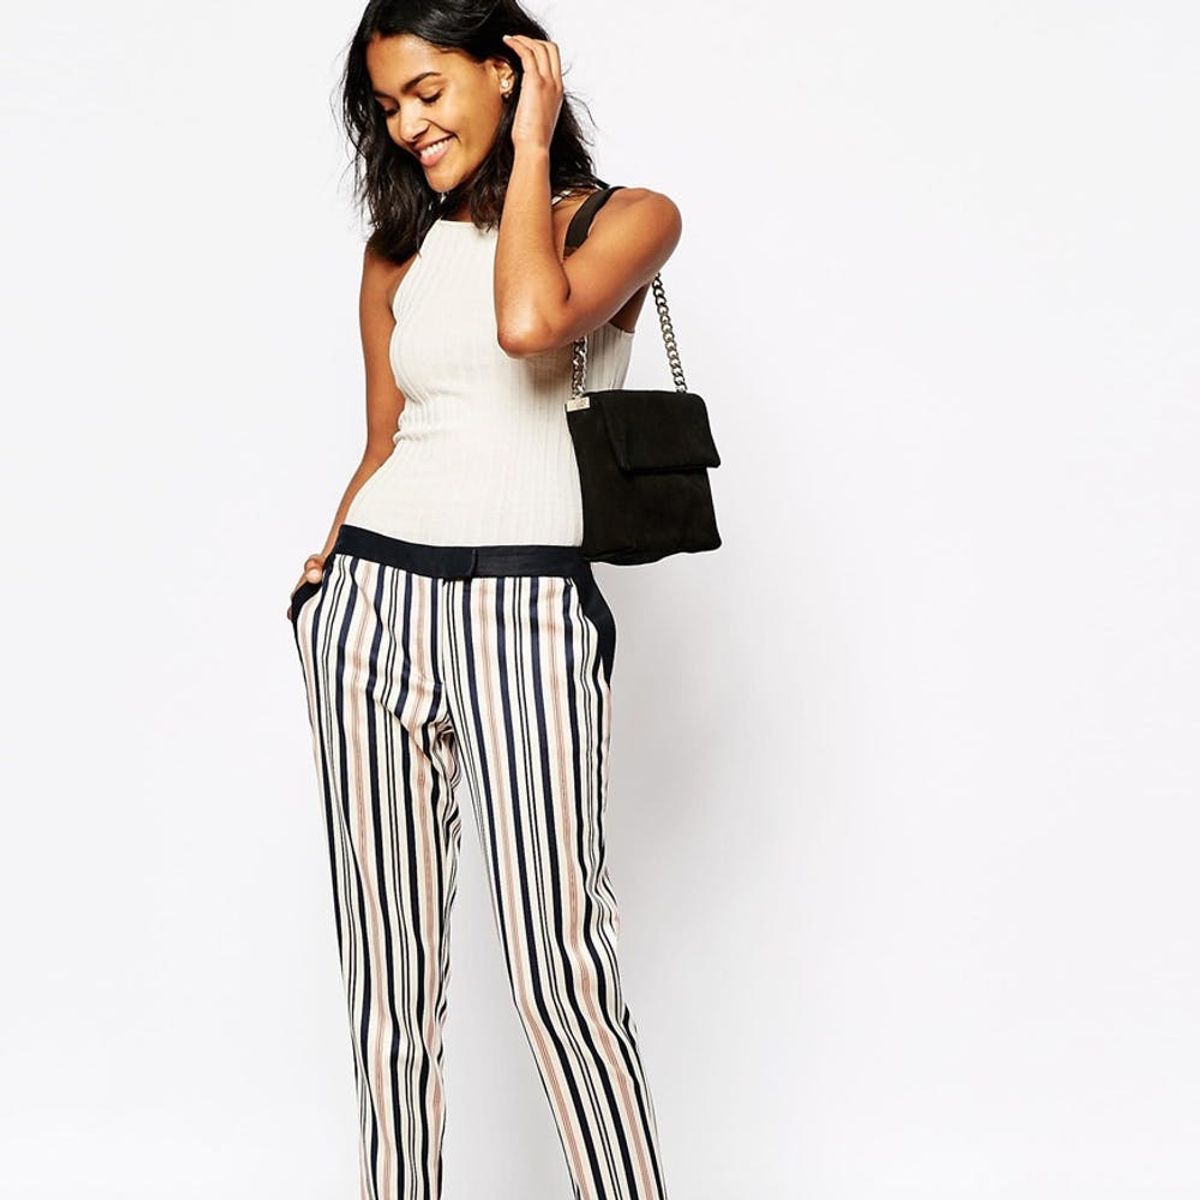 Spring Trends to Try: 15 Fresh Ways to Rock Stripes